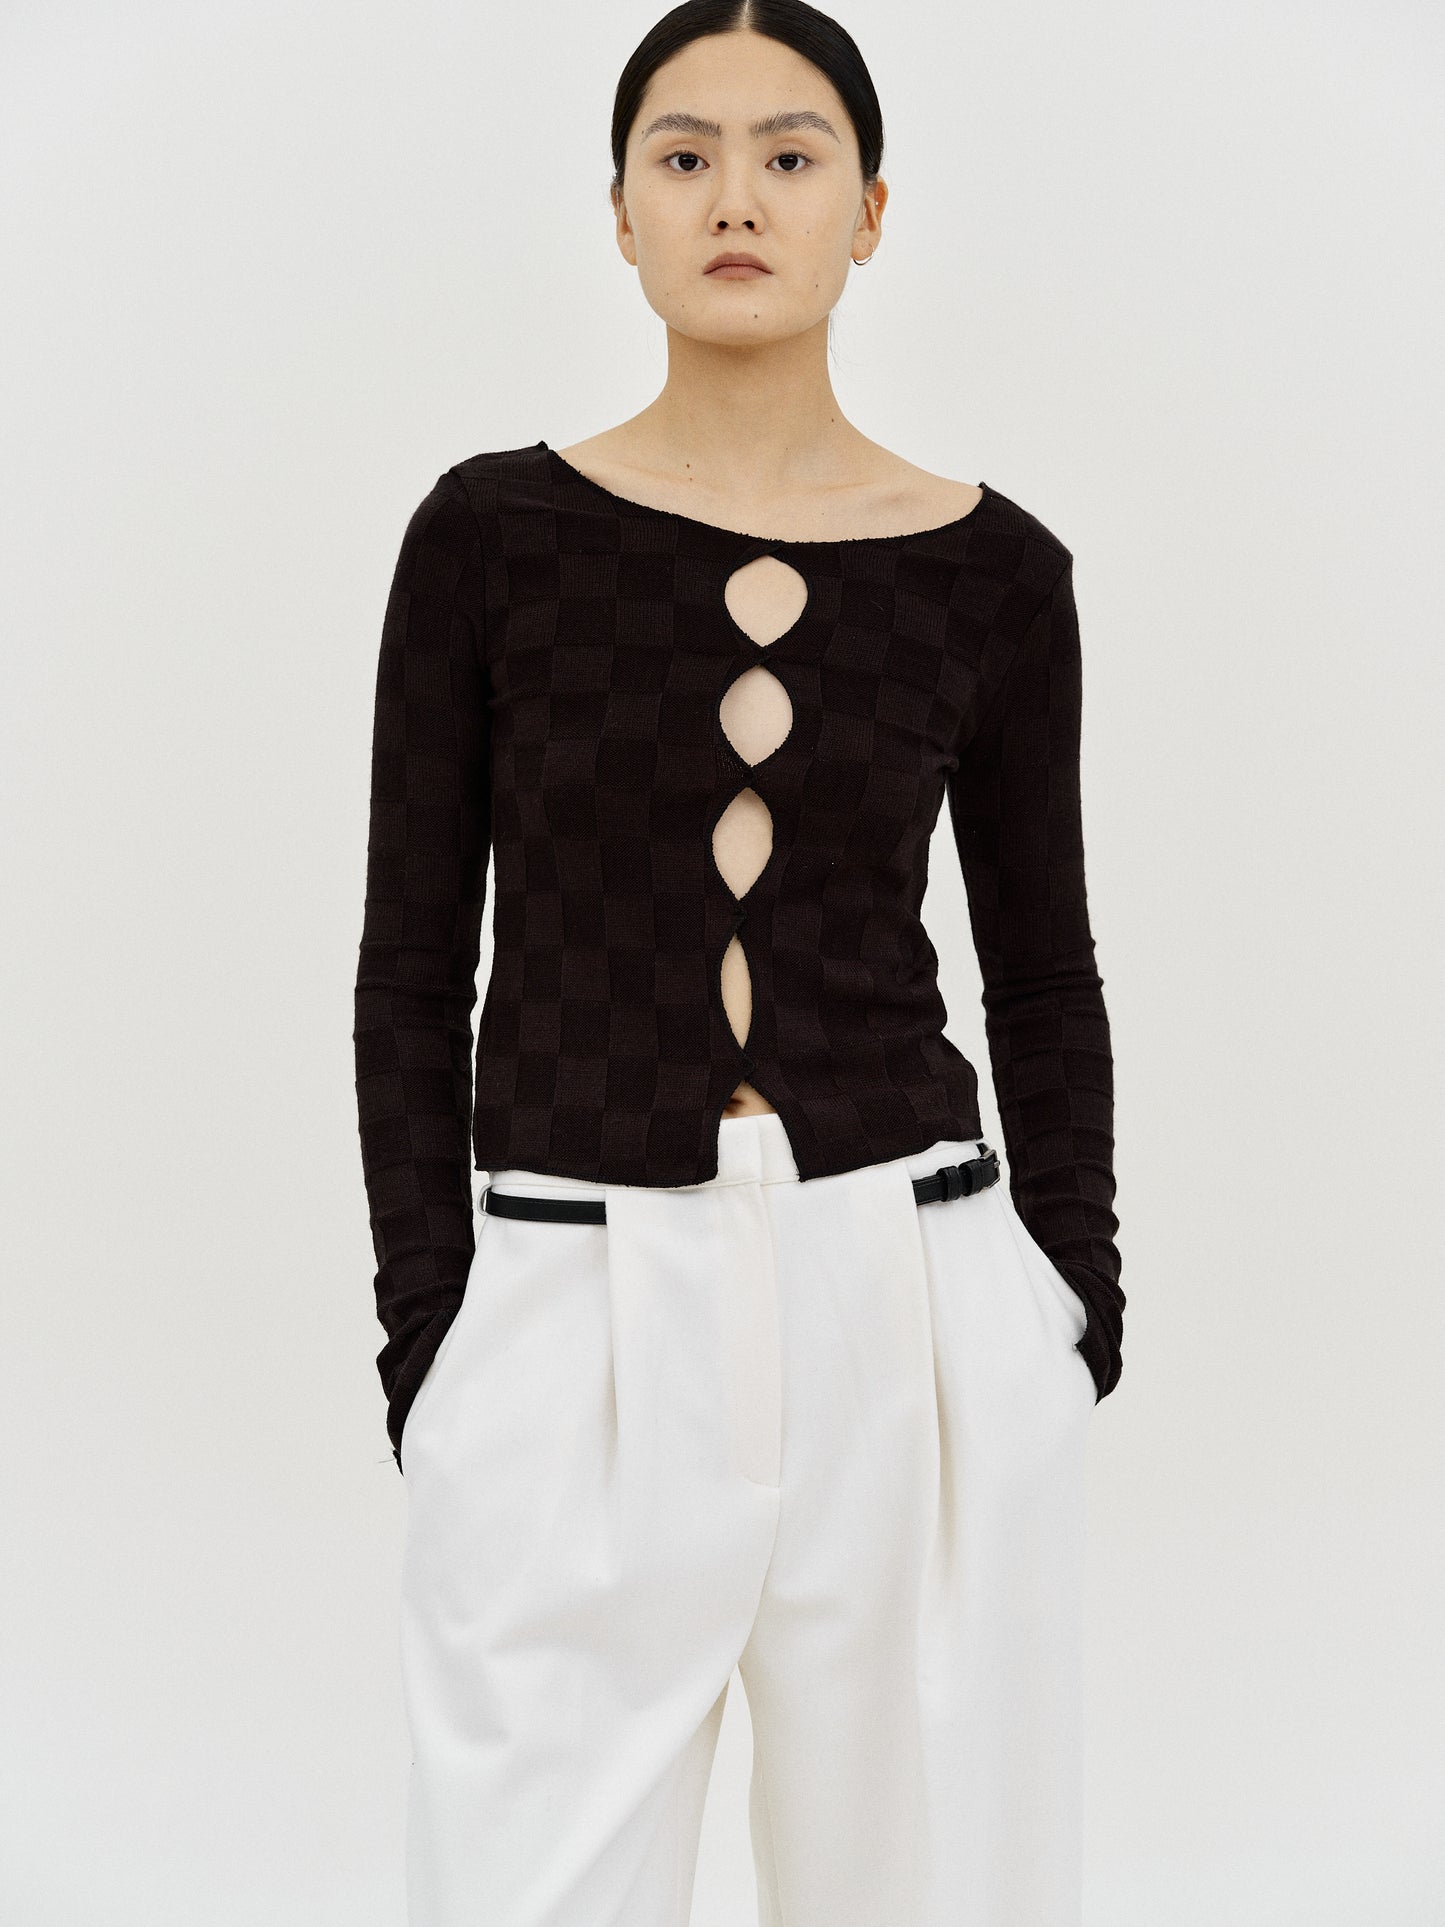 Cut-Out Check Knit Top, Black